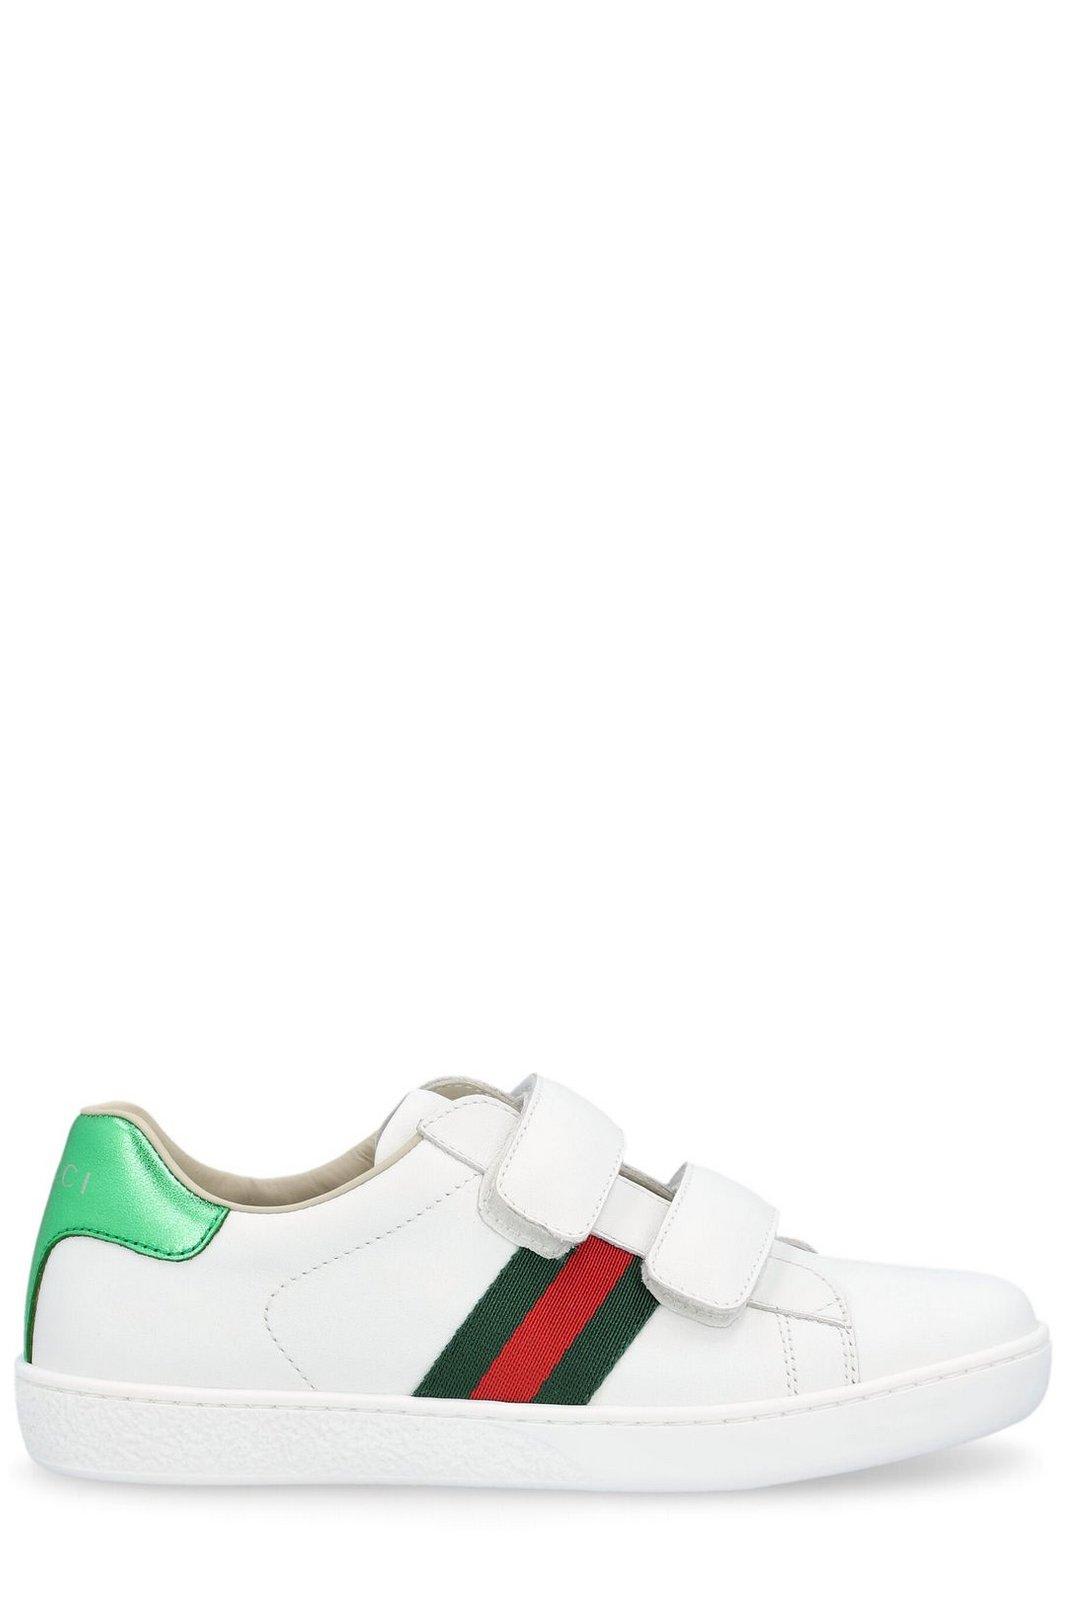 Gucci Ace Round Toe Sneakers